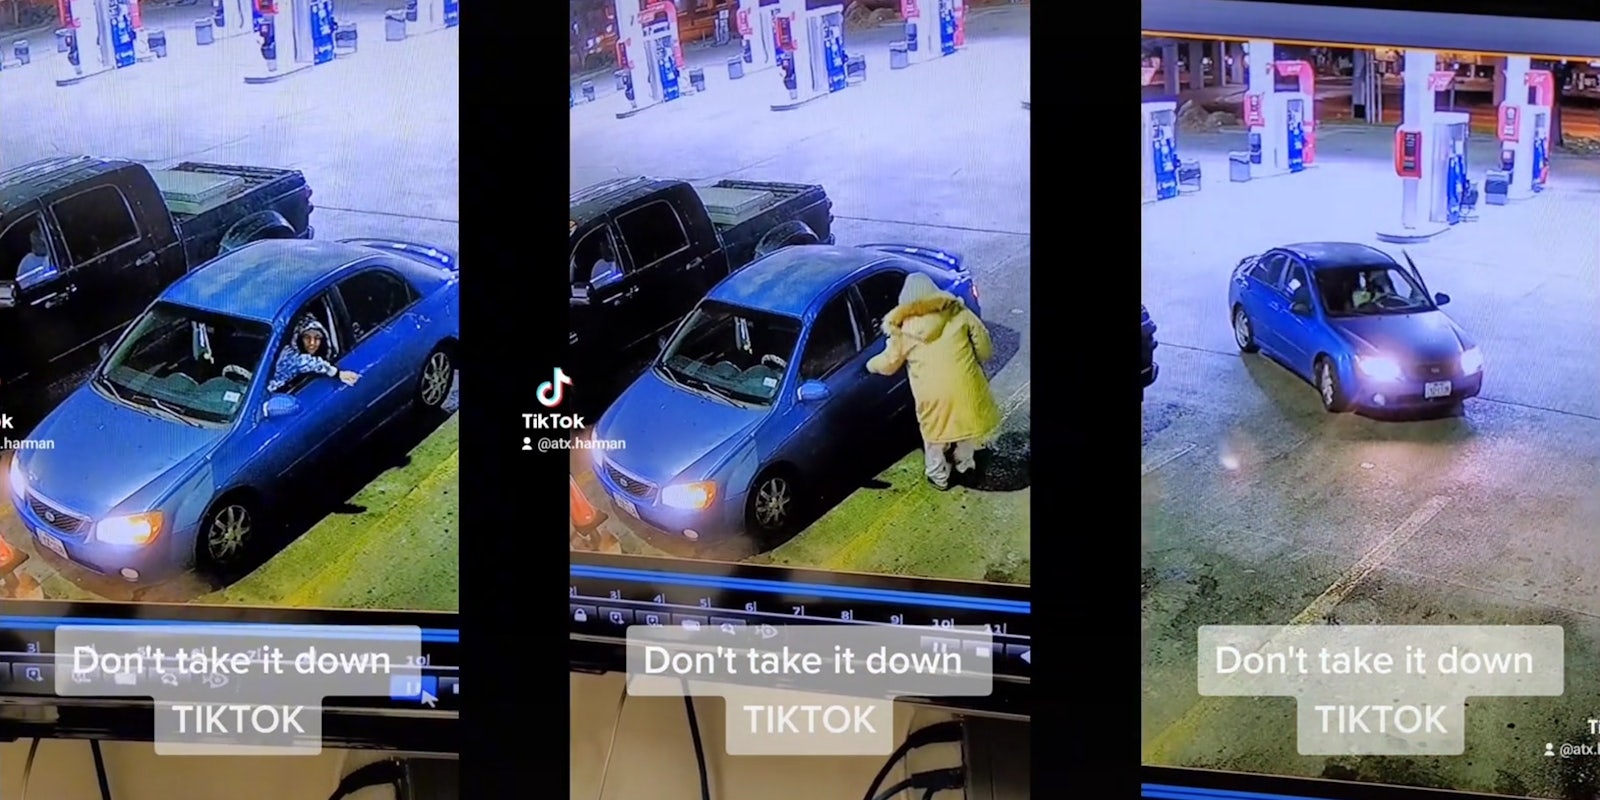 young woman getting out of car (l) man approaches car (c) man drives away with door open (r) all with caption 'don't take it down TIKTOK'